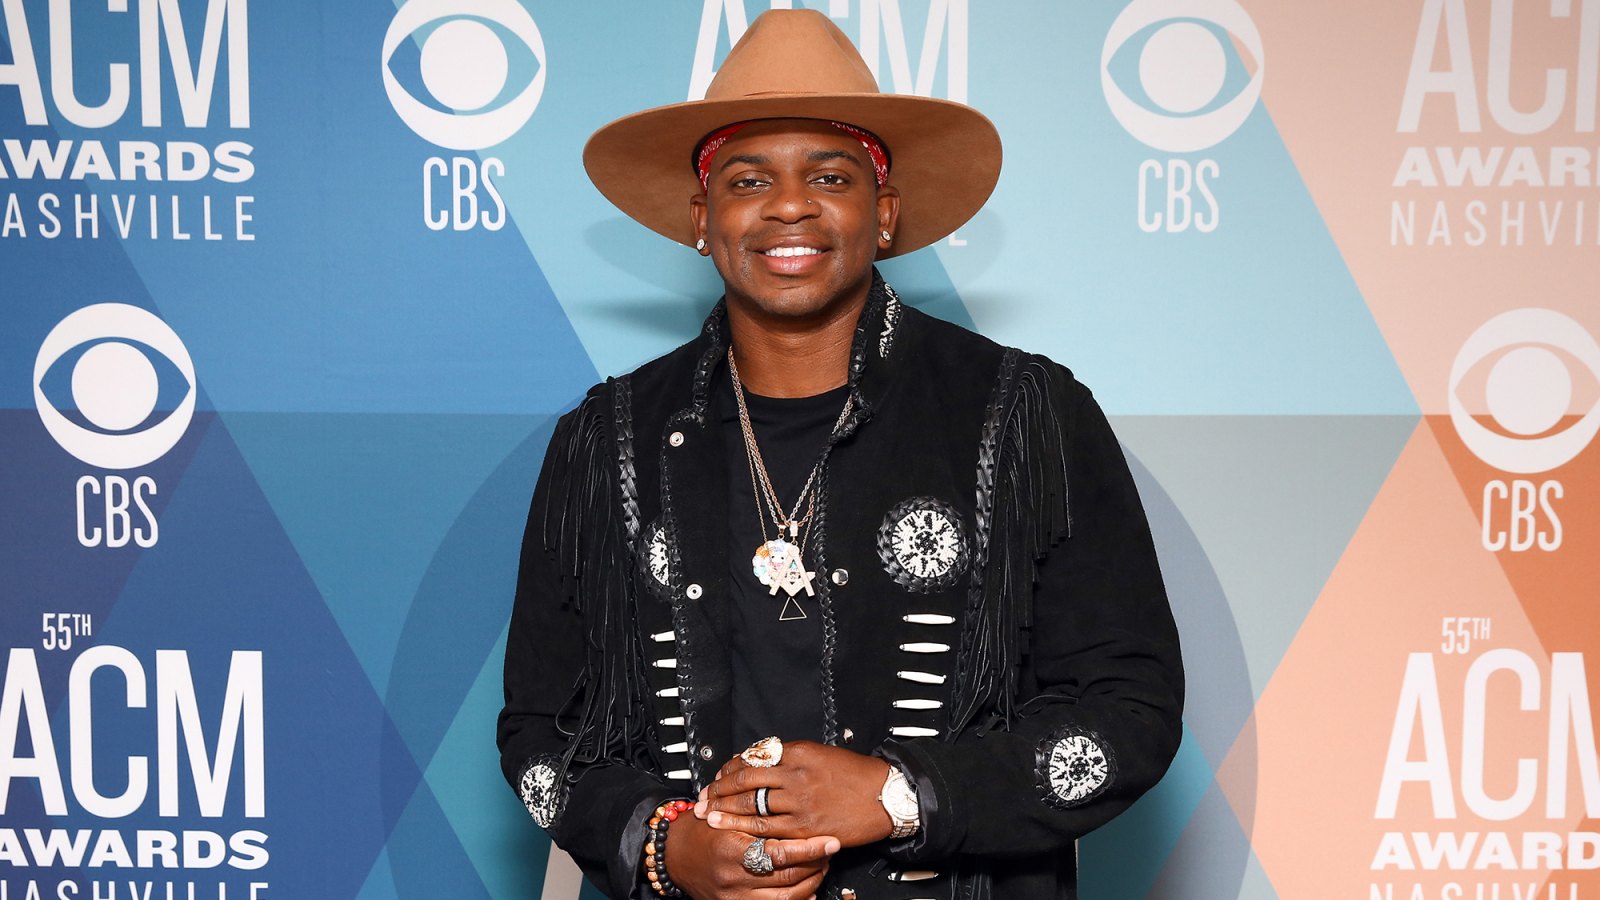 Country Singer Jimmie Allen’s Family Guide: Meet His 6 Children